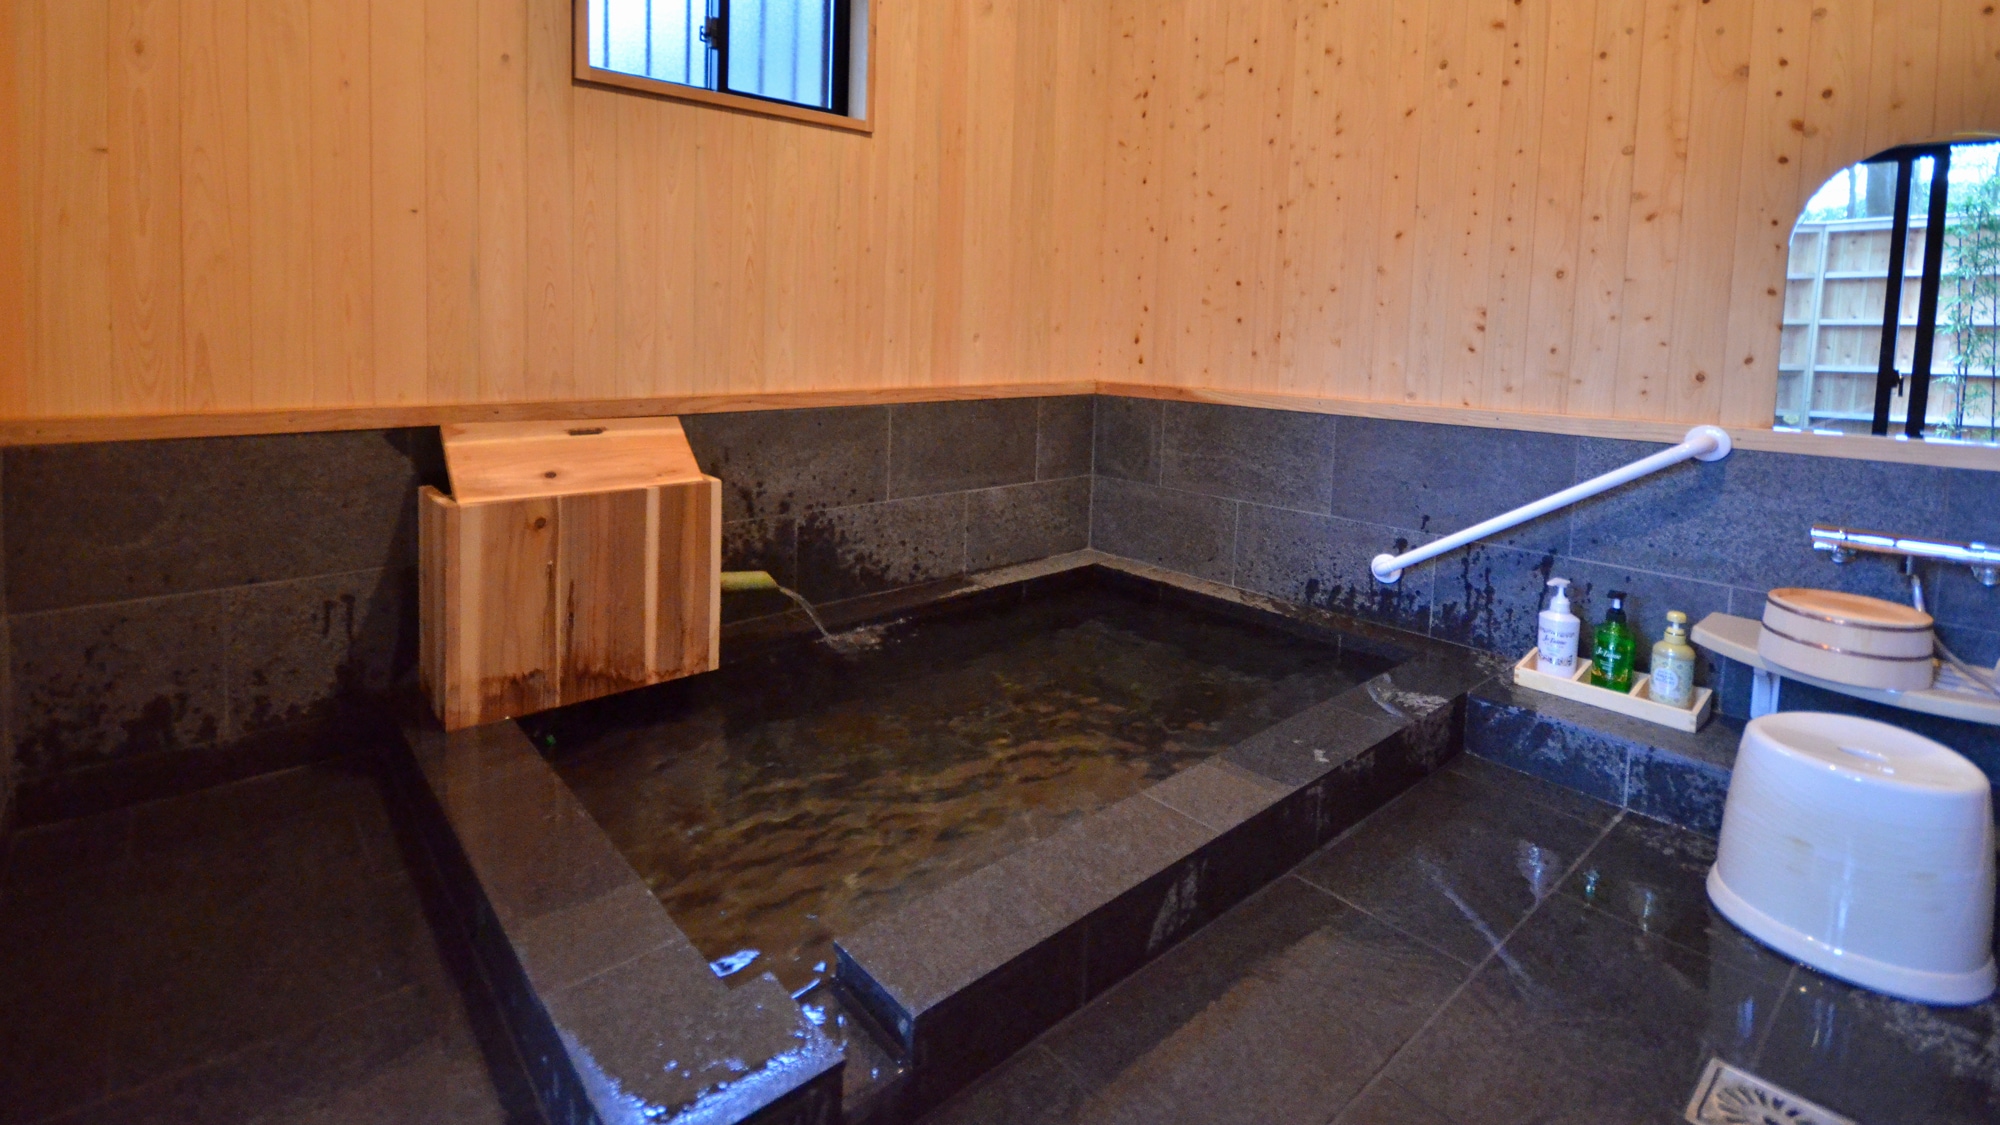 [Special room leopard plant] Indoor bath. The marble bathtub has a pleasant scent of cypress.